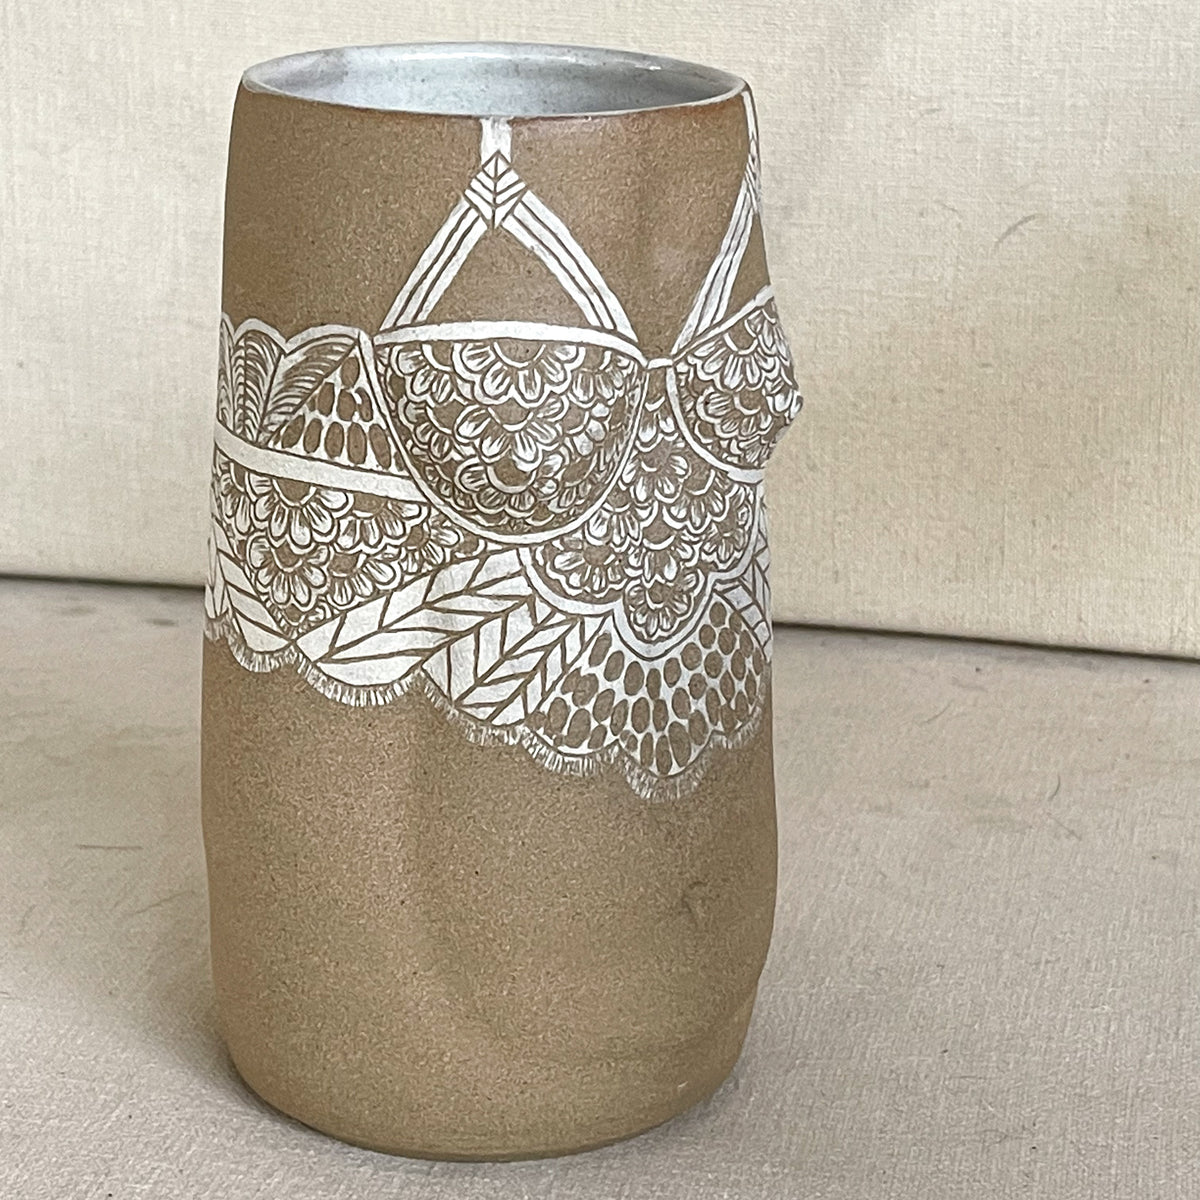 Brunnhilde Vase from Déesses de la nuit collection. Brown Body Stoneware Vase in the shape of the female form with sgraffito lacework done with white slip. Profile view